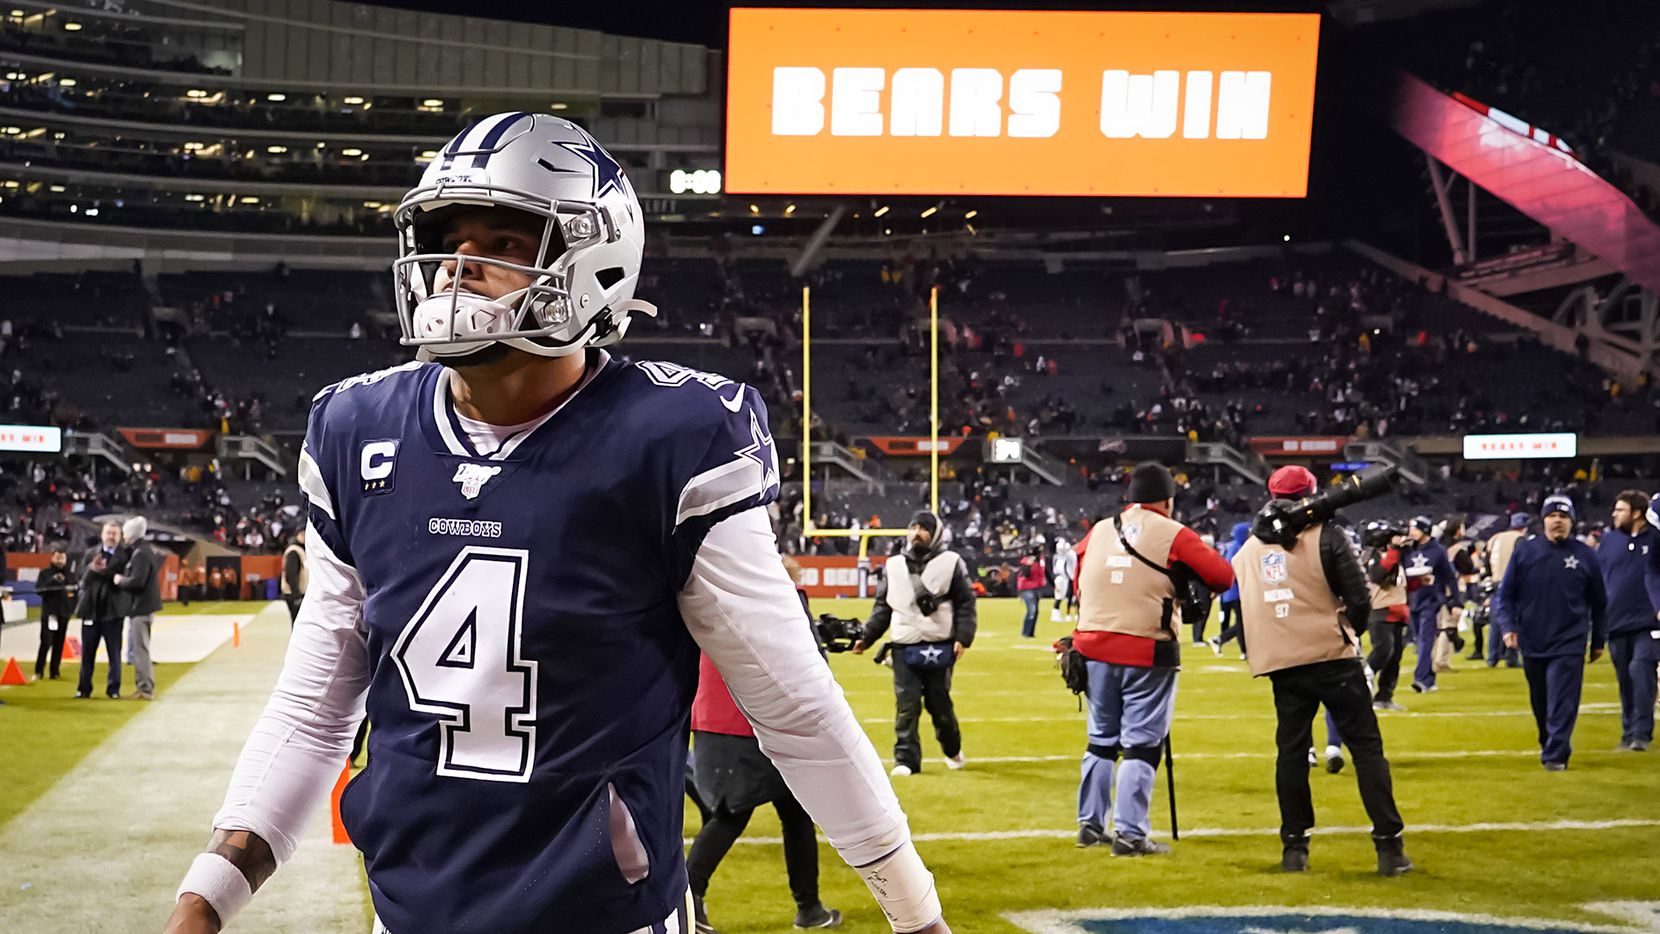 Dallas Cowboys quarterback Dak Prescott walks off the field after a loss to the Chicago Bears in an NFL football game at Soldier Field on Thursday, Dec. 5, 2019, in Chicago.